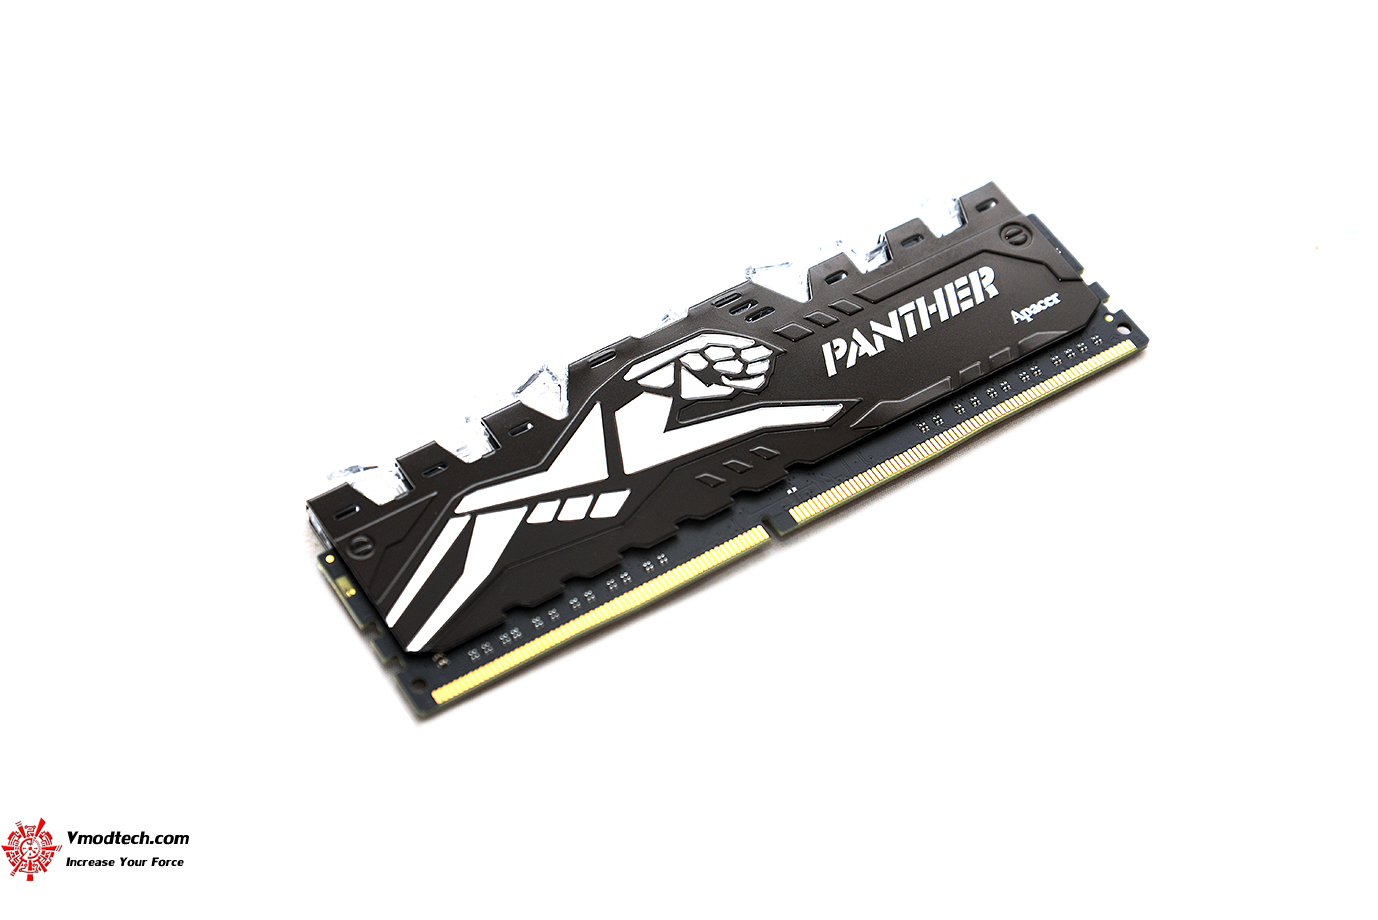 dsc 1326 Apacer Panther Rage Illumination DDR4 2400 16GB Review 